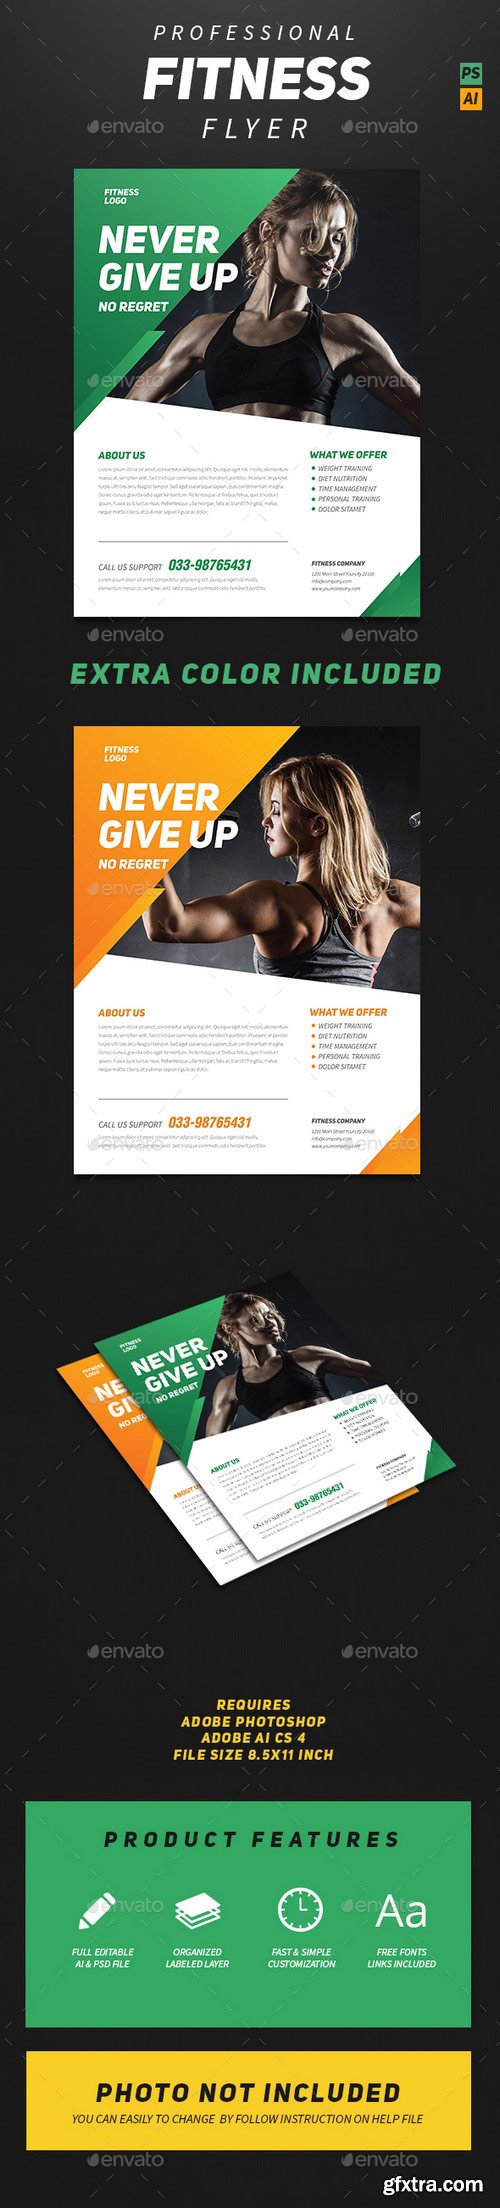 Graphicriver - Professional Fitness Flyer 14059698